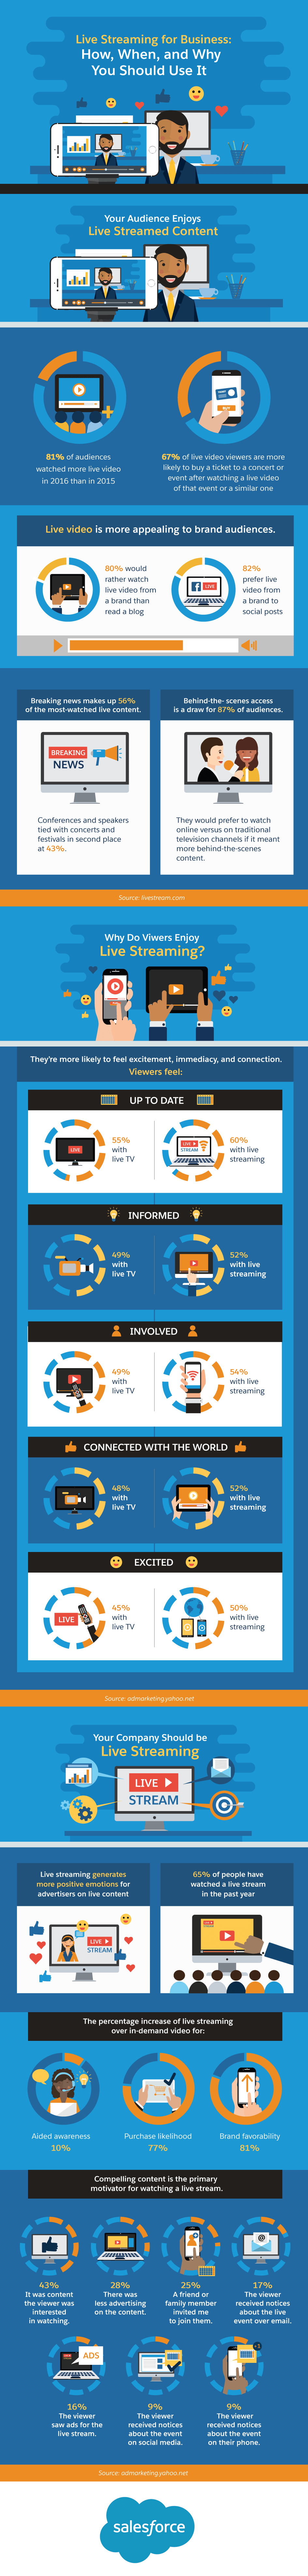 Live-Streaming for Business: How, When and Why You Should Use It [Infographic]